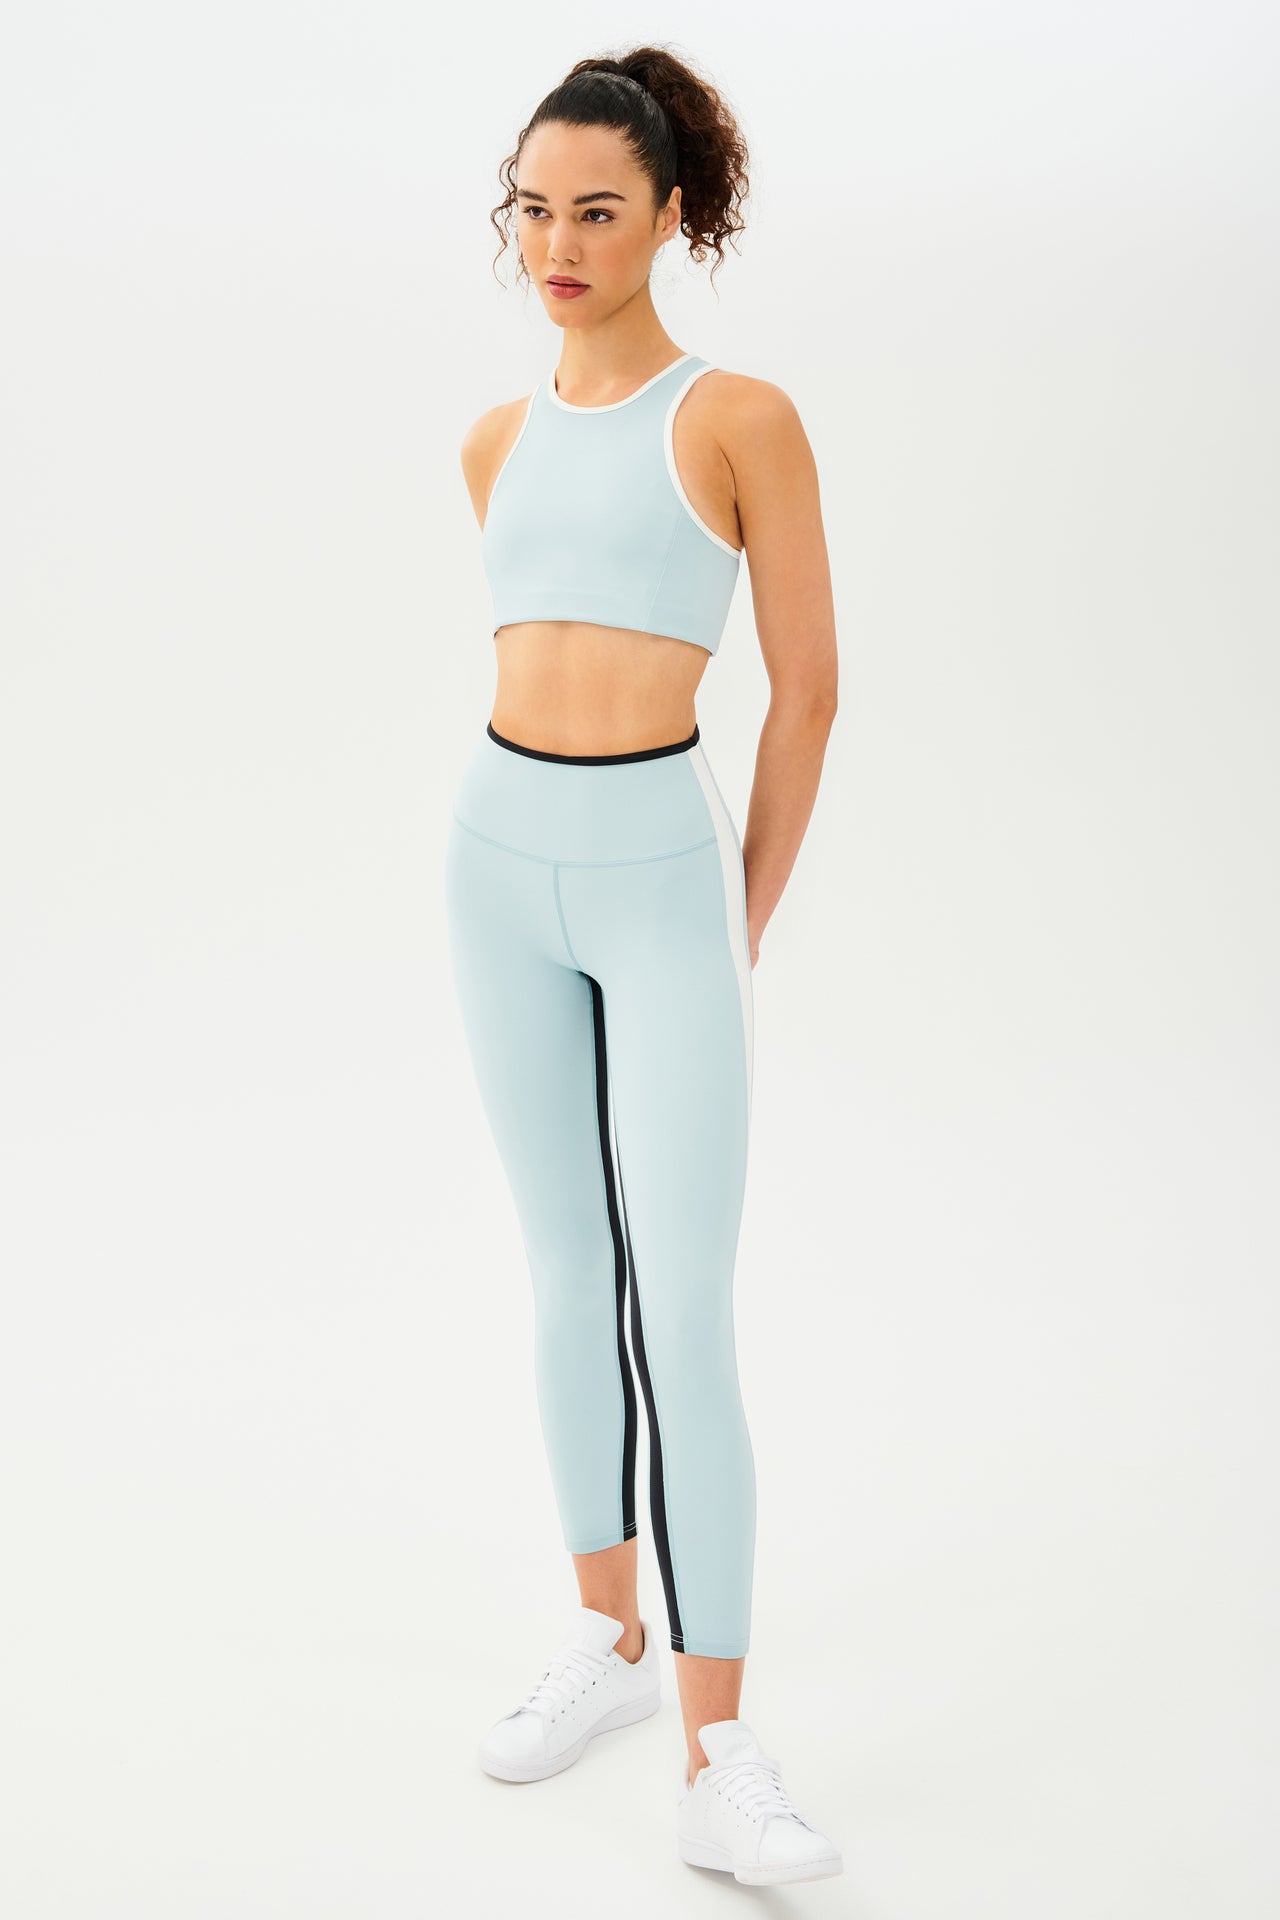 Full side view of girl wearing light blue sports bra with white hem and light blue leggings with black stripe around the waistband and white stripe down the outer seam and a black stripe on inseam and white shoes